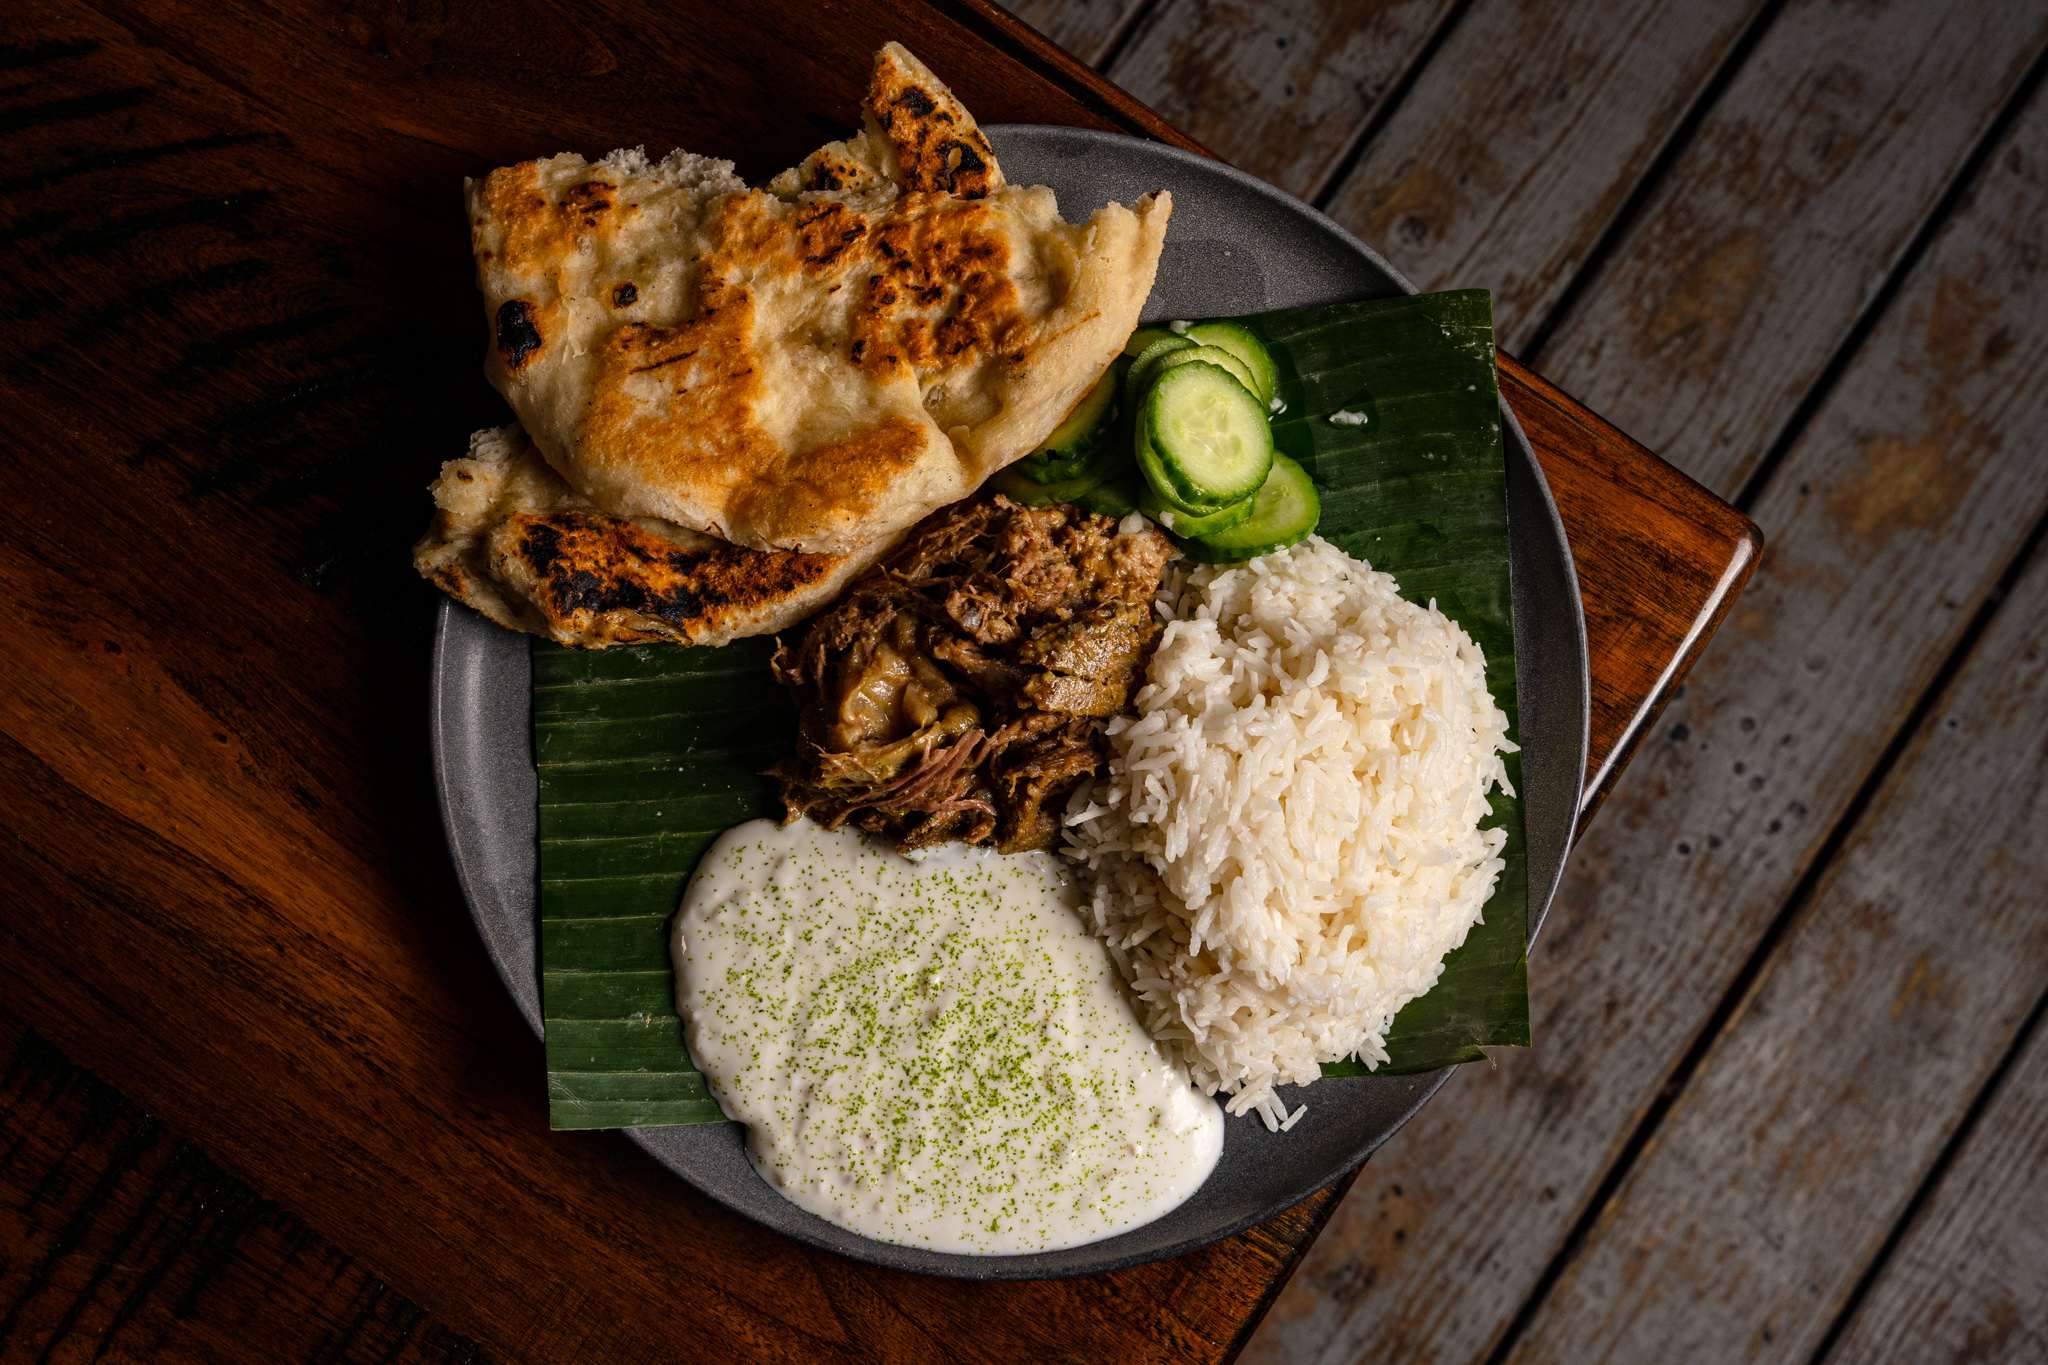 A dish with a banana leaf, Indian bread, rice, meat, cucumbers, and a white sauce on a dark table